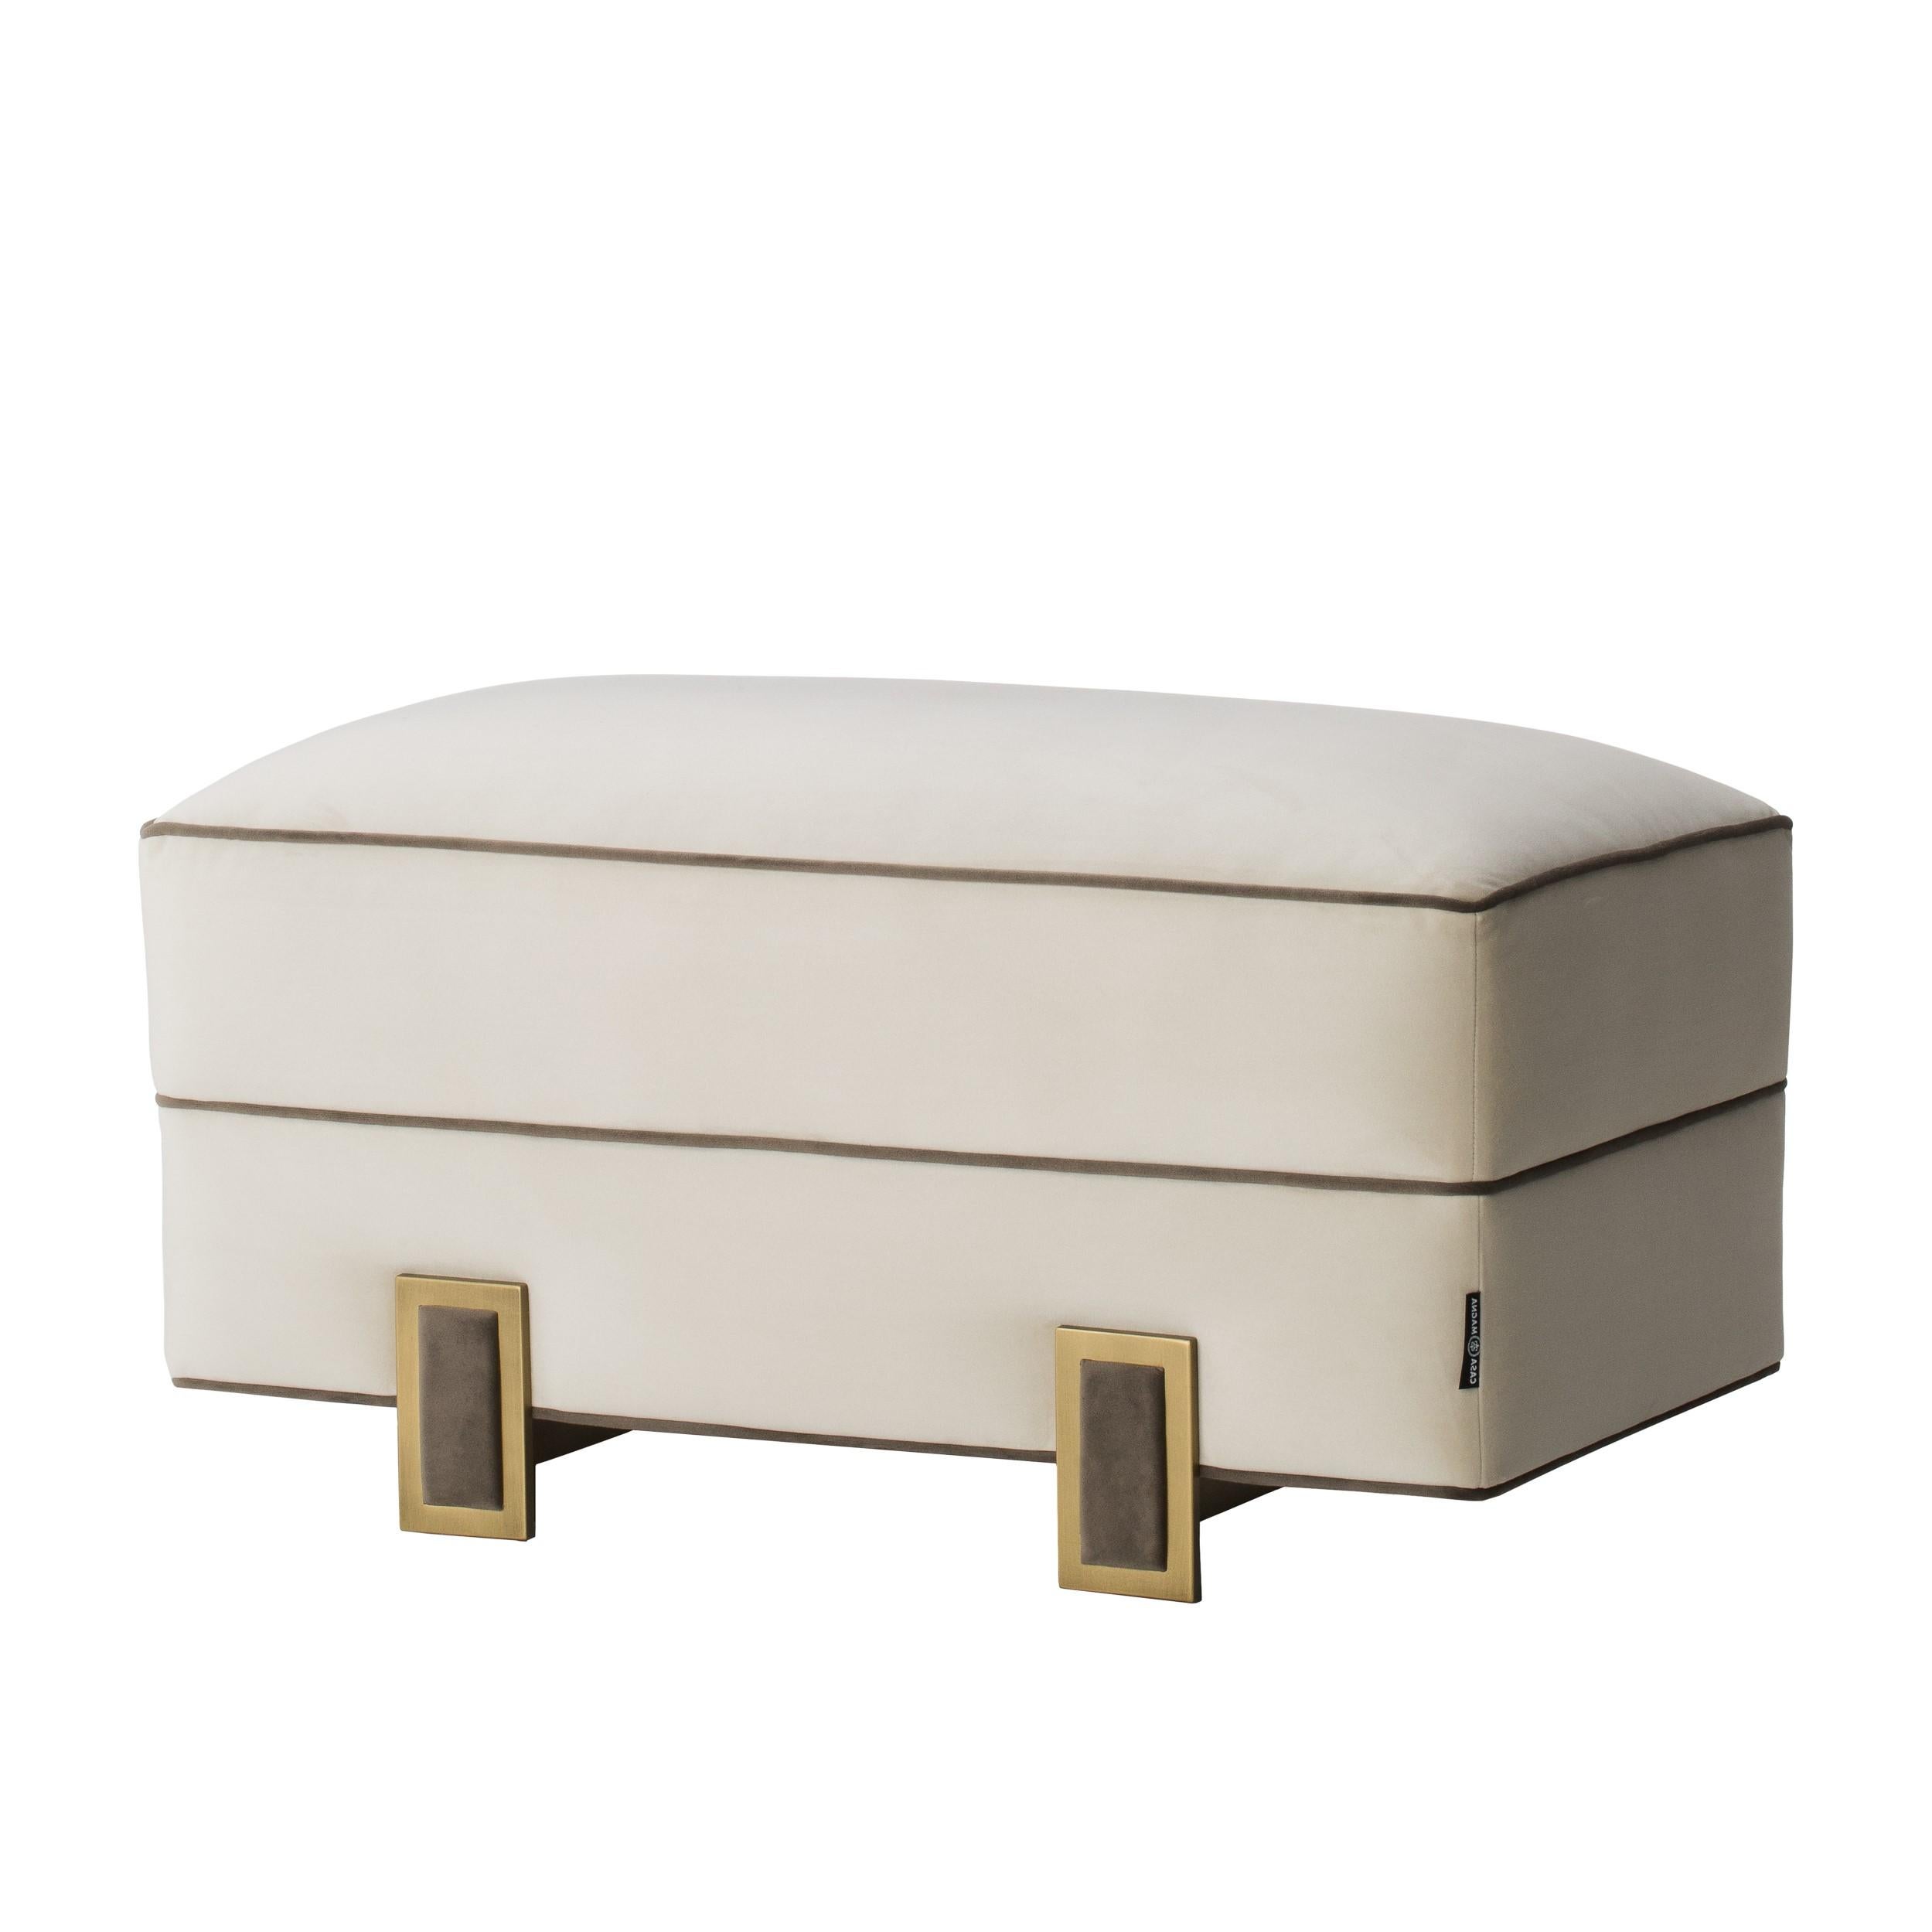 LUSO stool is a very delicate and well-balanced piece, upholstered in fabric with a contrasting piping detail and base in antique brass color.‎ Perfectly matches with the Luso sofa, completing the perfect setting.‎ Also available with eco-leather,